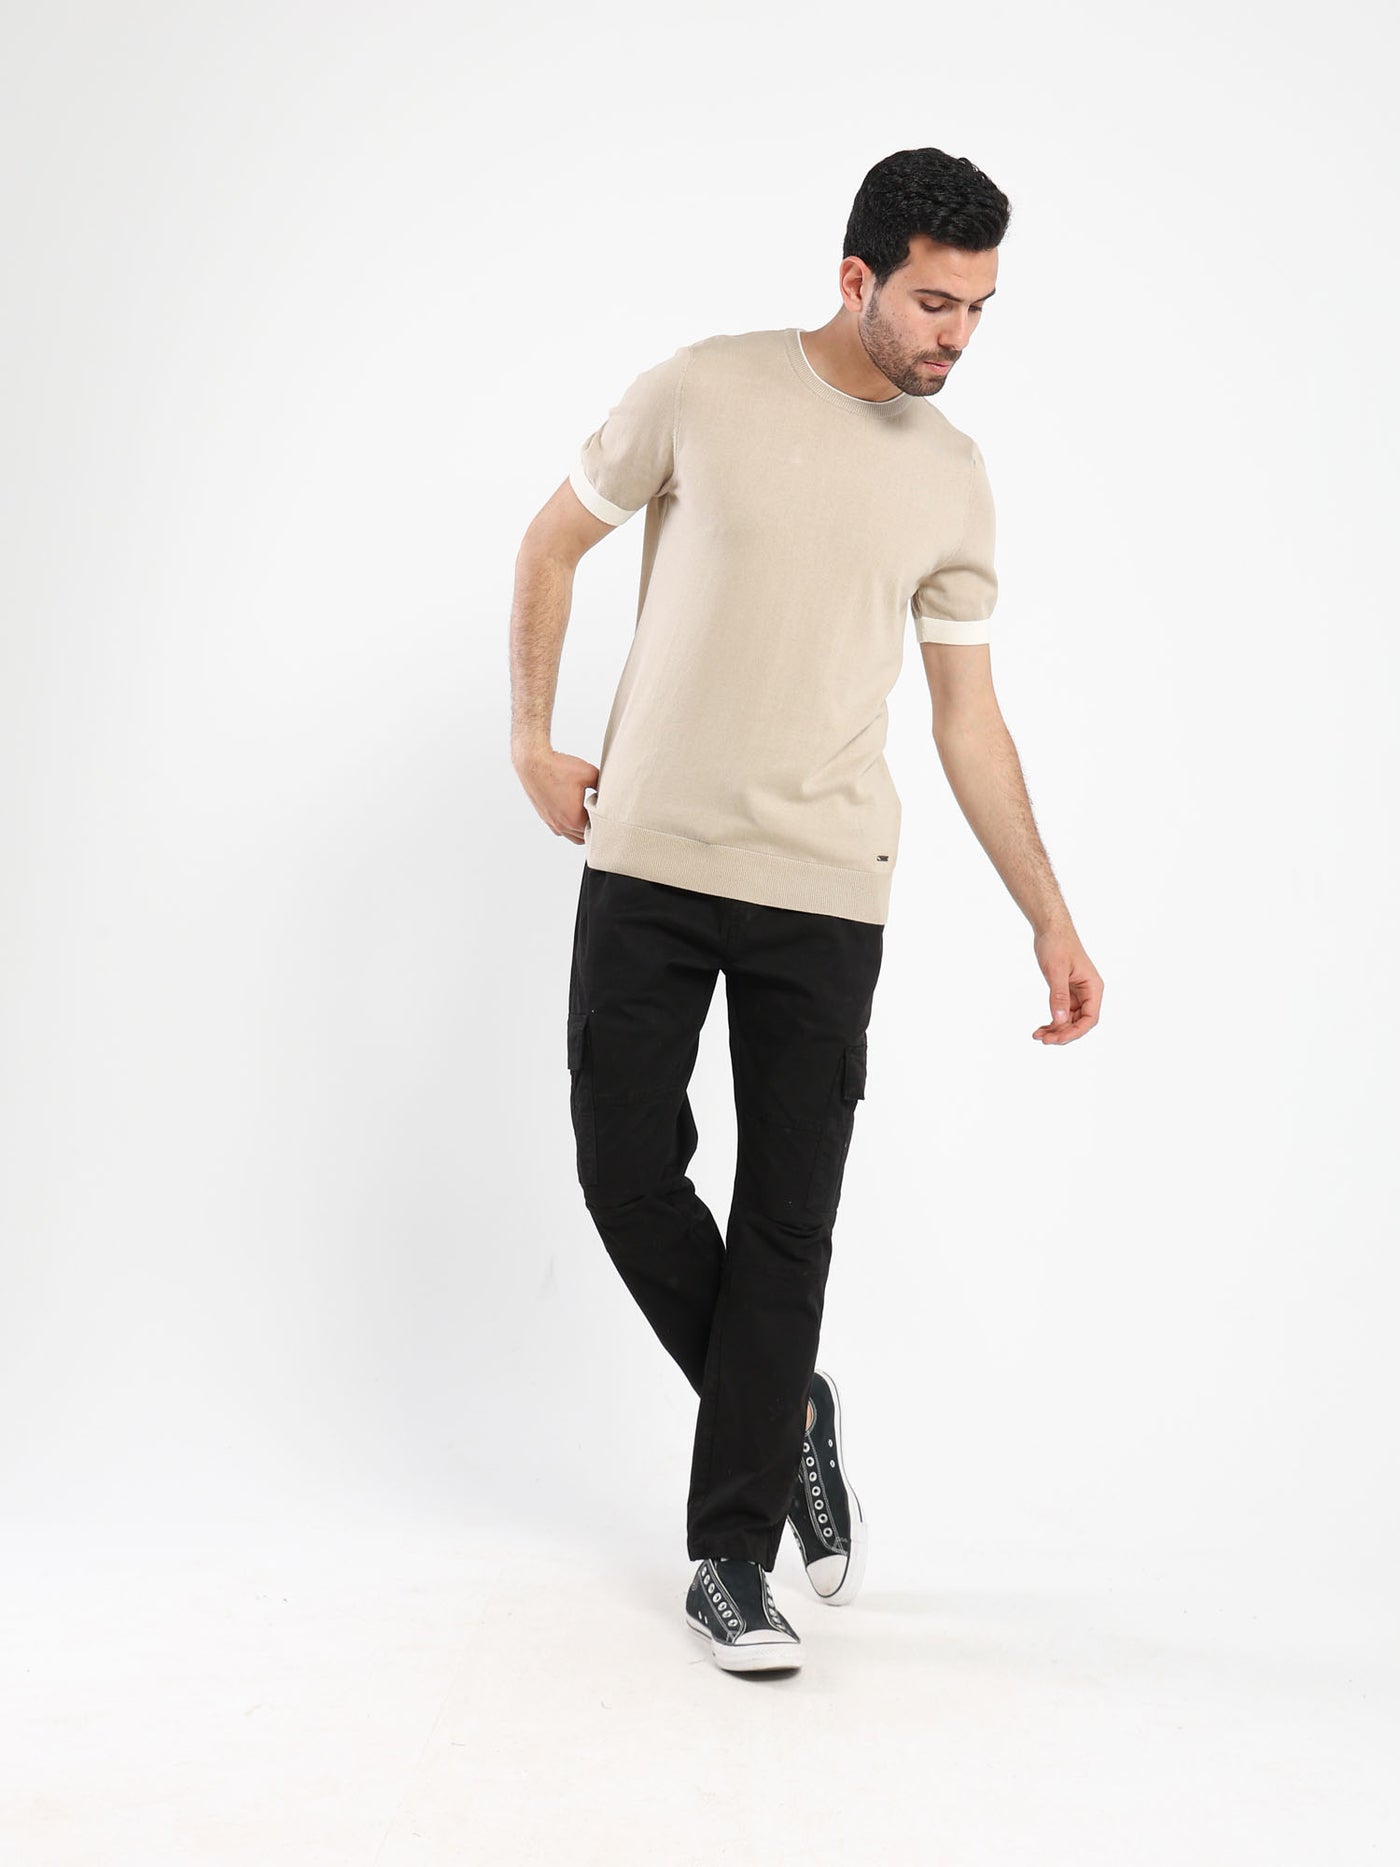 T-Shirt - Contrasting Sleeves - Round Neck